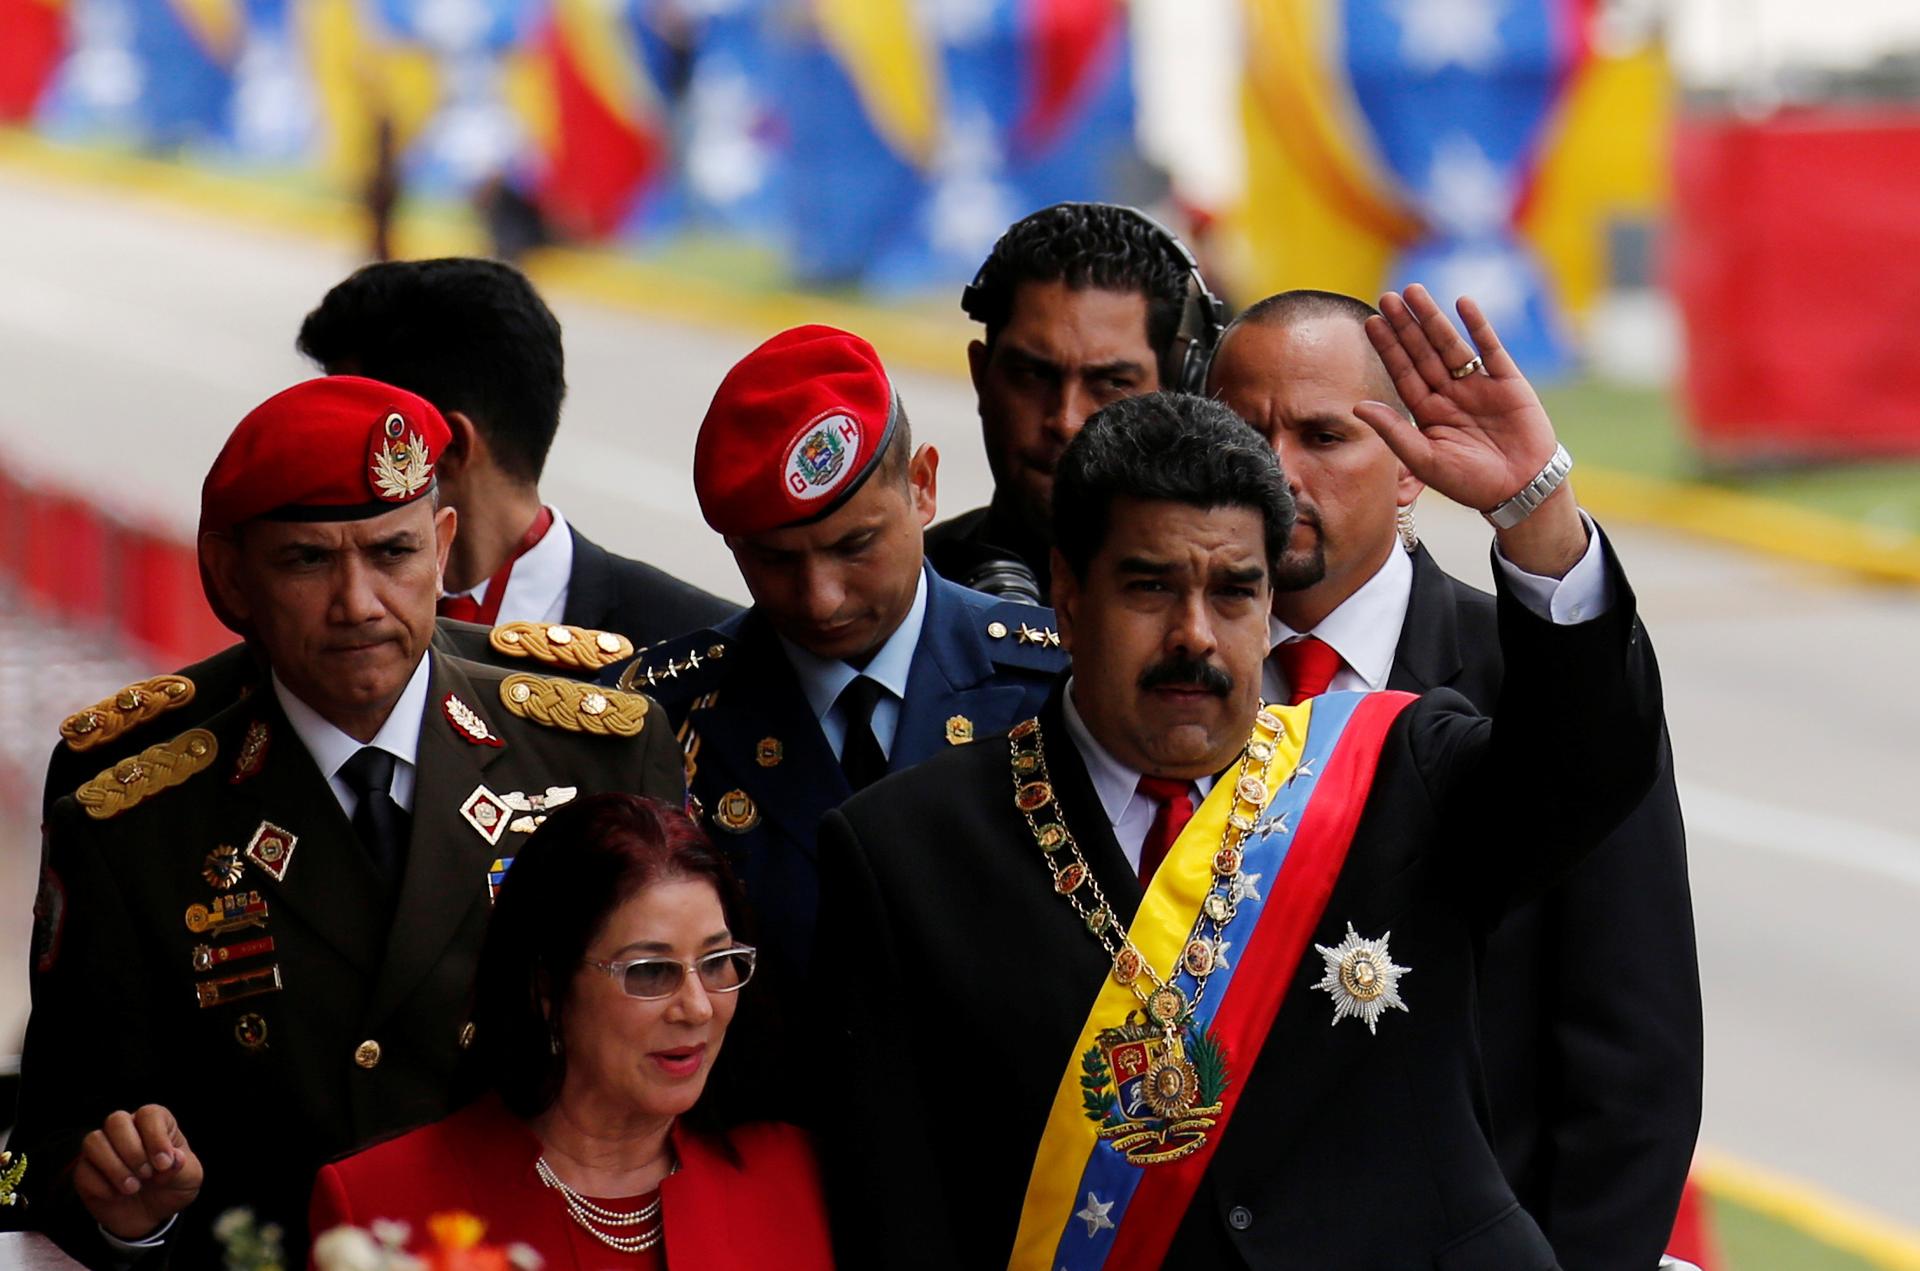 Venezuela's President Nicolas Maduro waves to the media next to his wife Cilia Flores after the military parade to celebrate the 205th anniversary of Venezuela's independence in Caracas, Venezuela July 5, 2016.